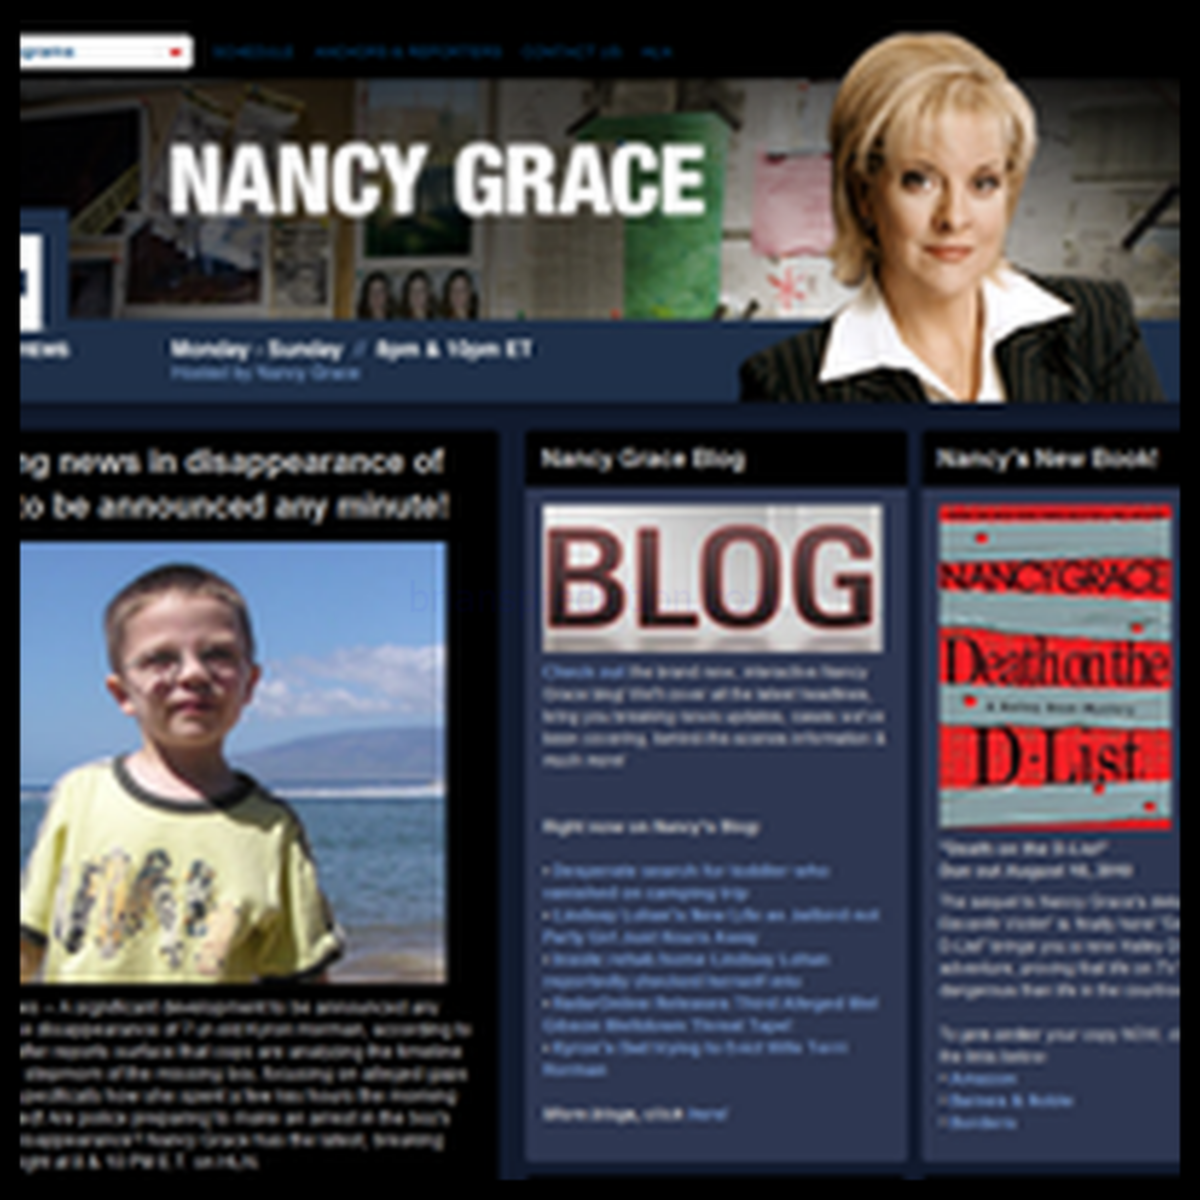 Nancy Grace Missing Person Cases Psychic Detective Brian Ladd Update On Case  Images Q3Dtbn And9gcqk4b1ipxvtgvrwg4fxnmyu41tepc1wdwybp1cvt97yllcy3hlc Found
Nancy Grace Missing Person Cases Psychic Detective Brian Ladd Update On Case  Images Q3Dtbn And9gcqk4b1ipxvtgvrwg4fxnmyu41tepc1wdwybp1cvt97yllcy3hlc Found
